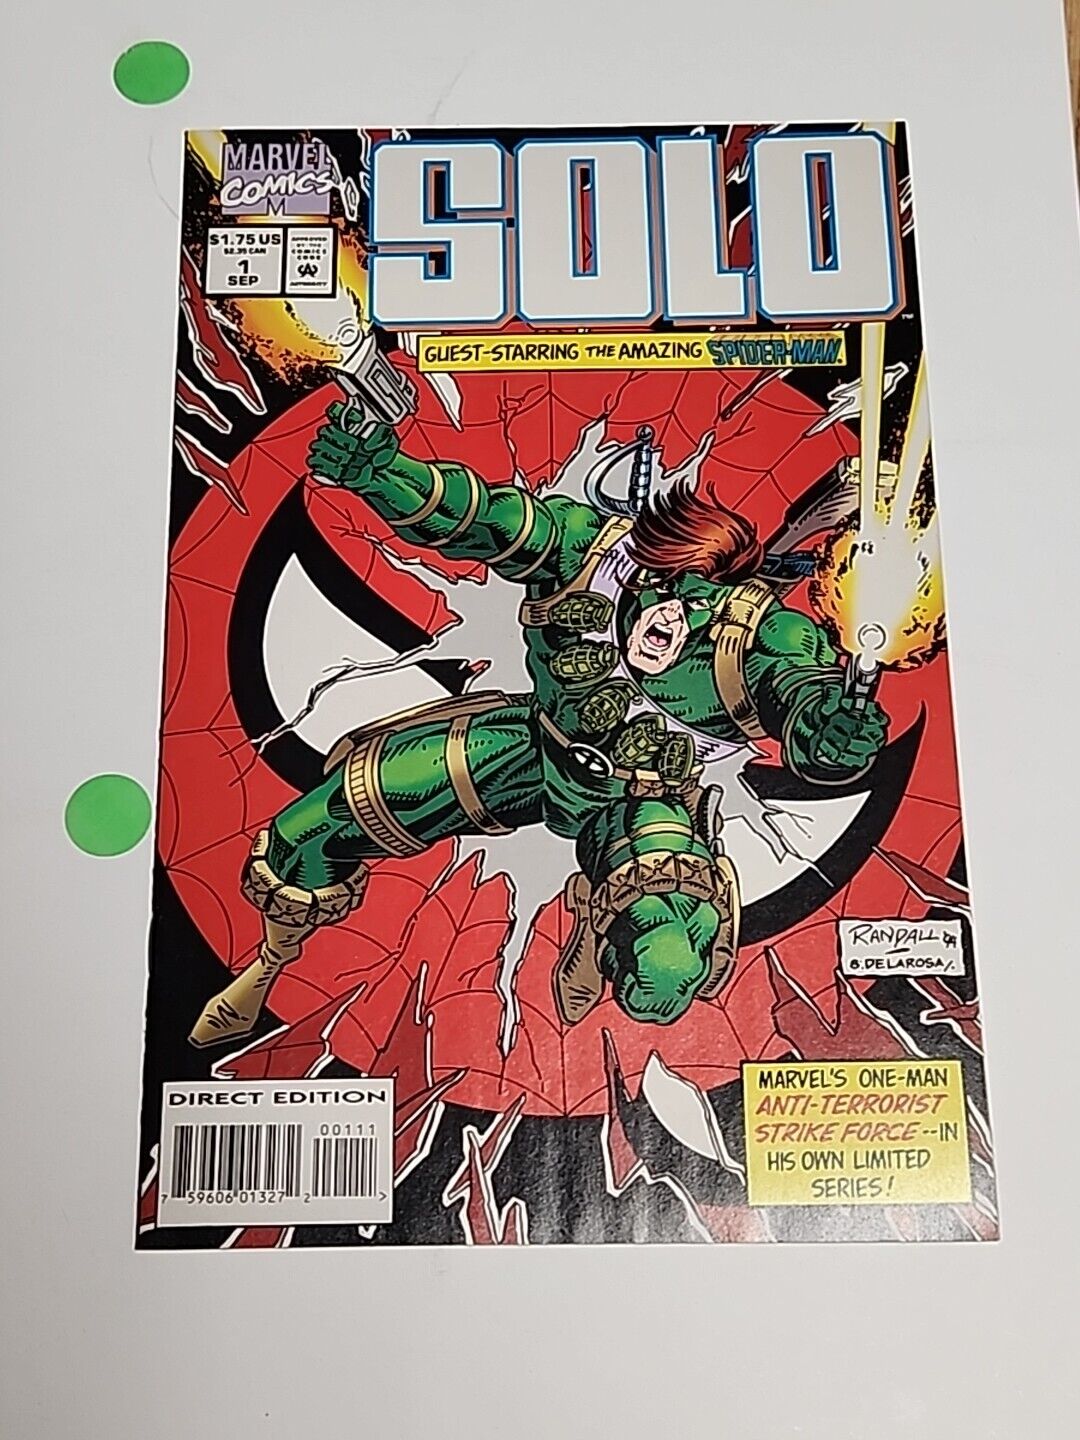 SOLO #1 (Marvel 1994) Spider-Man Appearance 